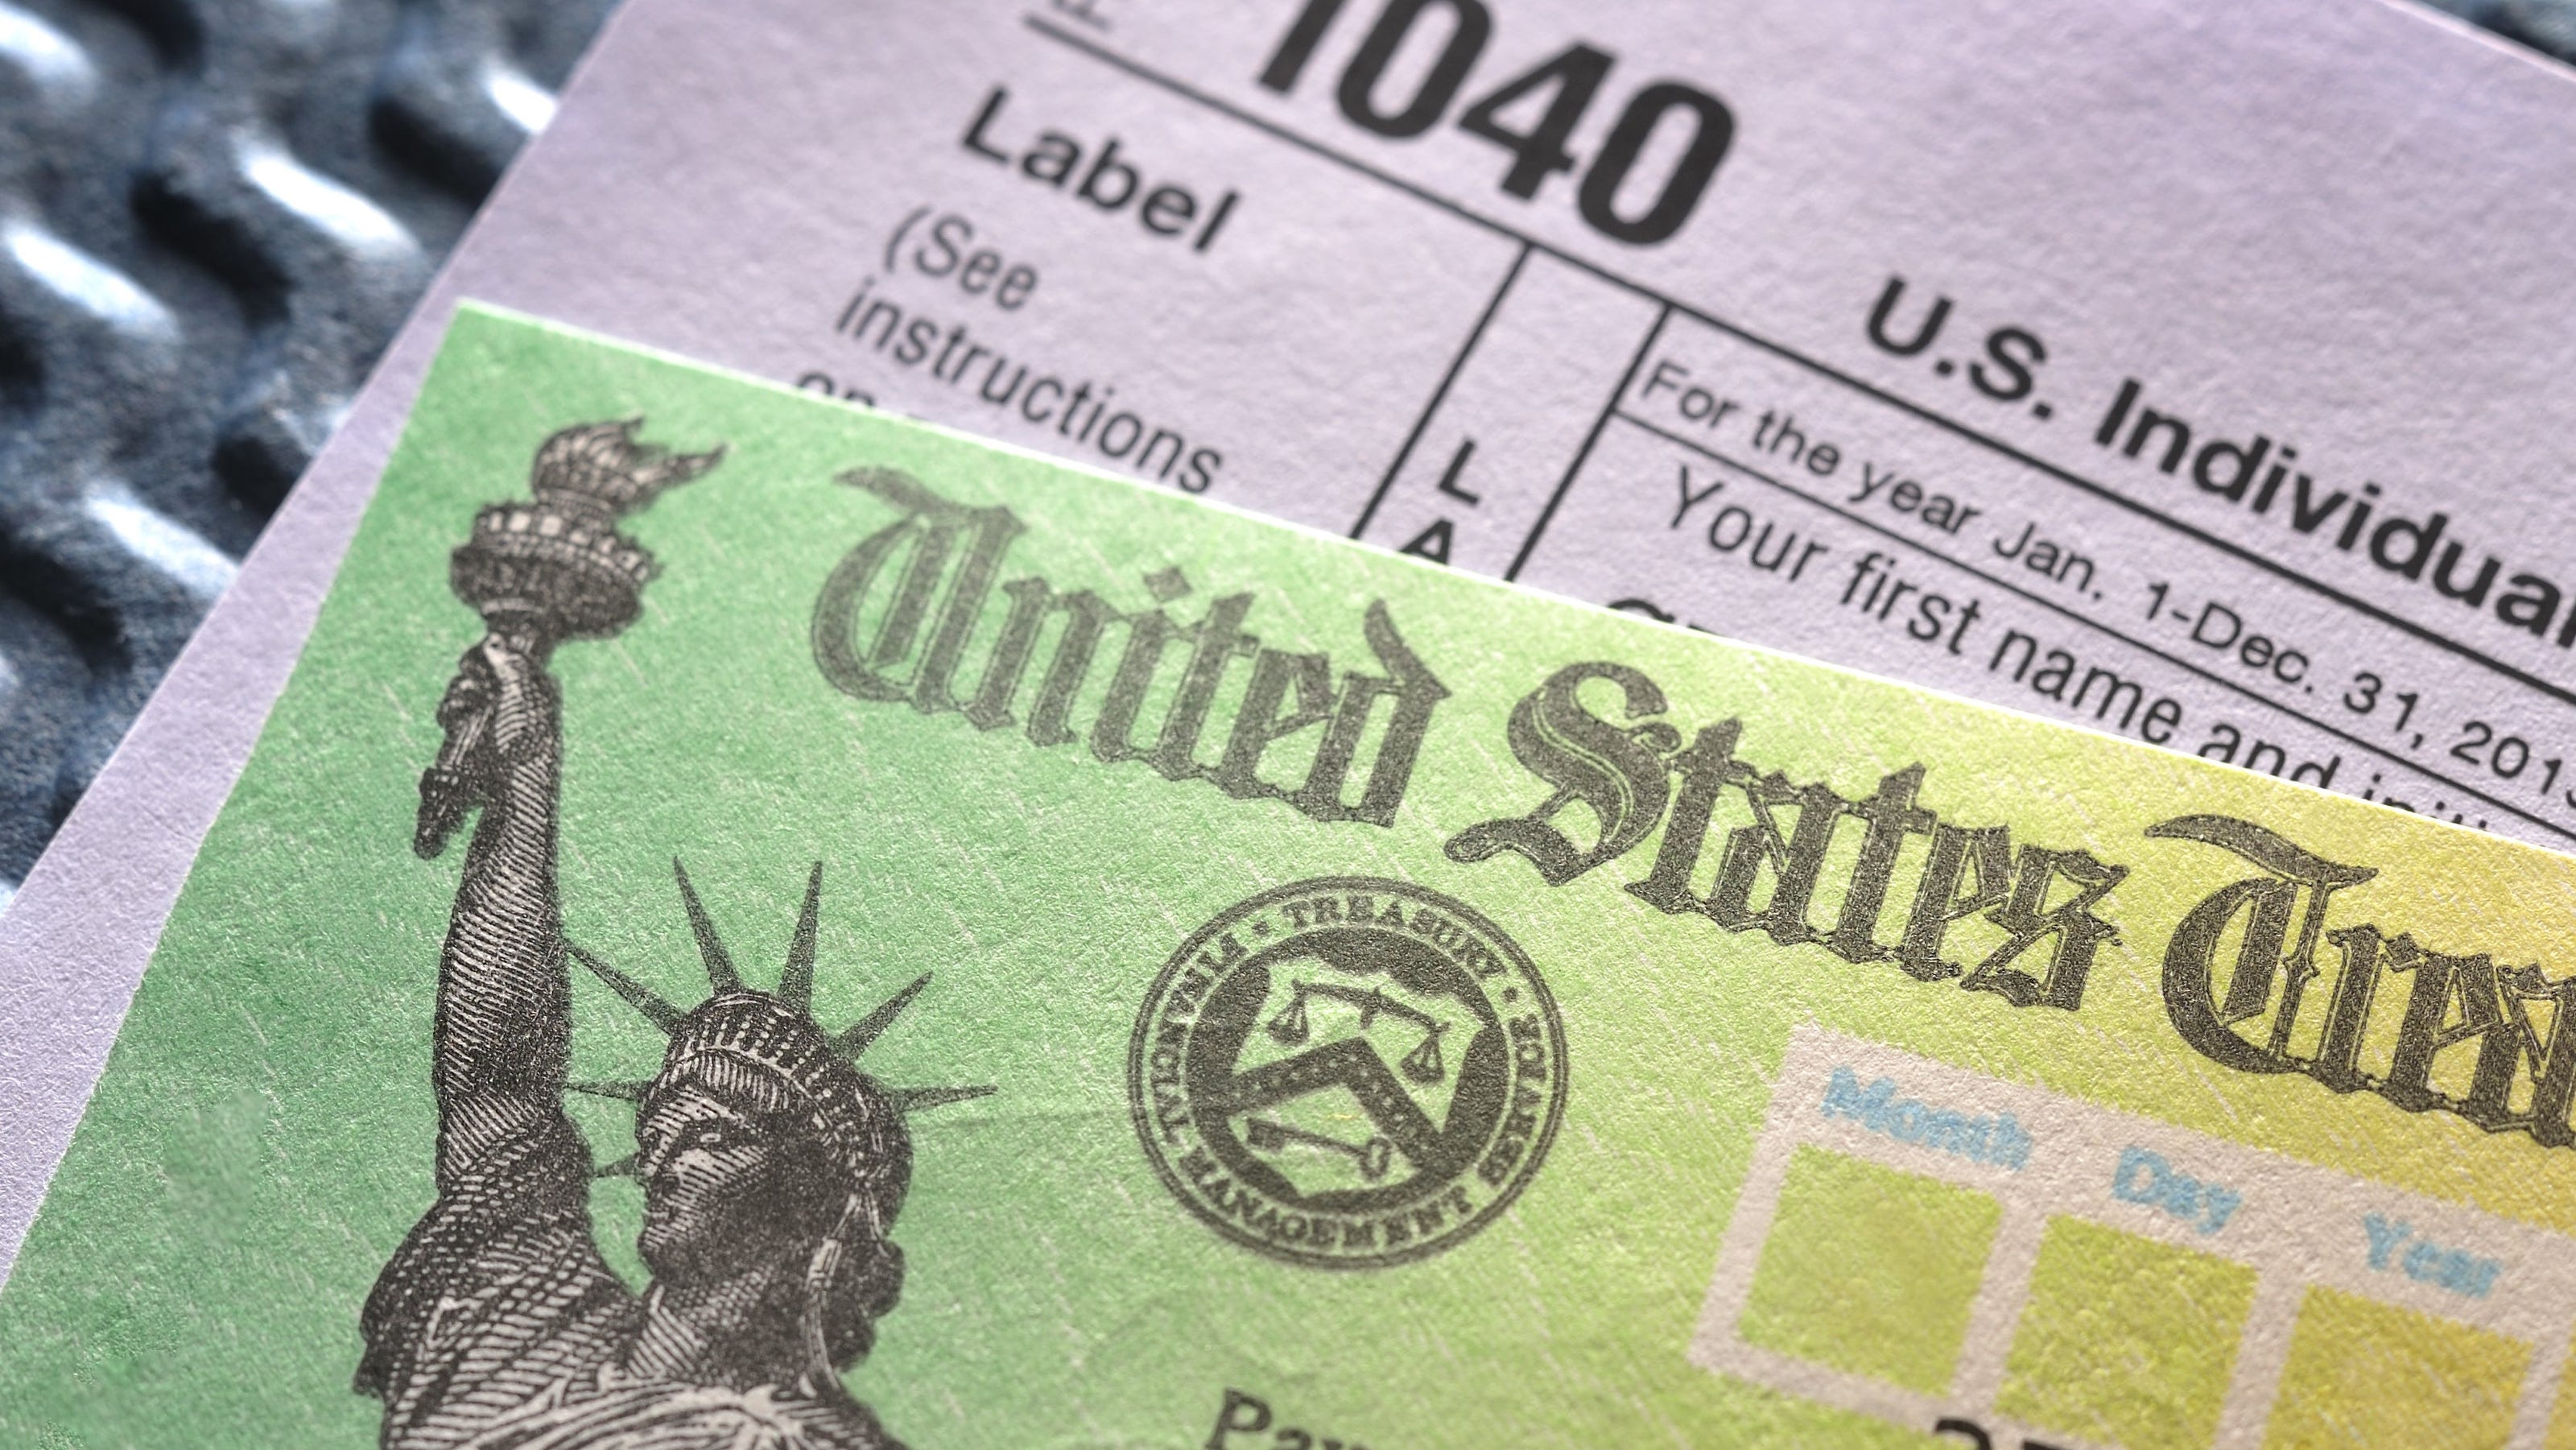 Standard deduction 2020: How much it's increasing from 2019